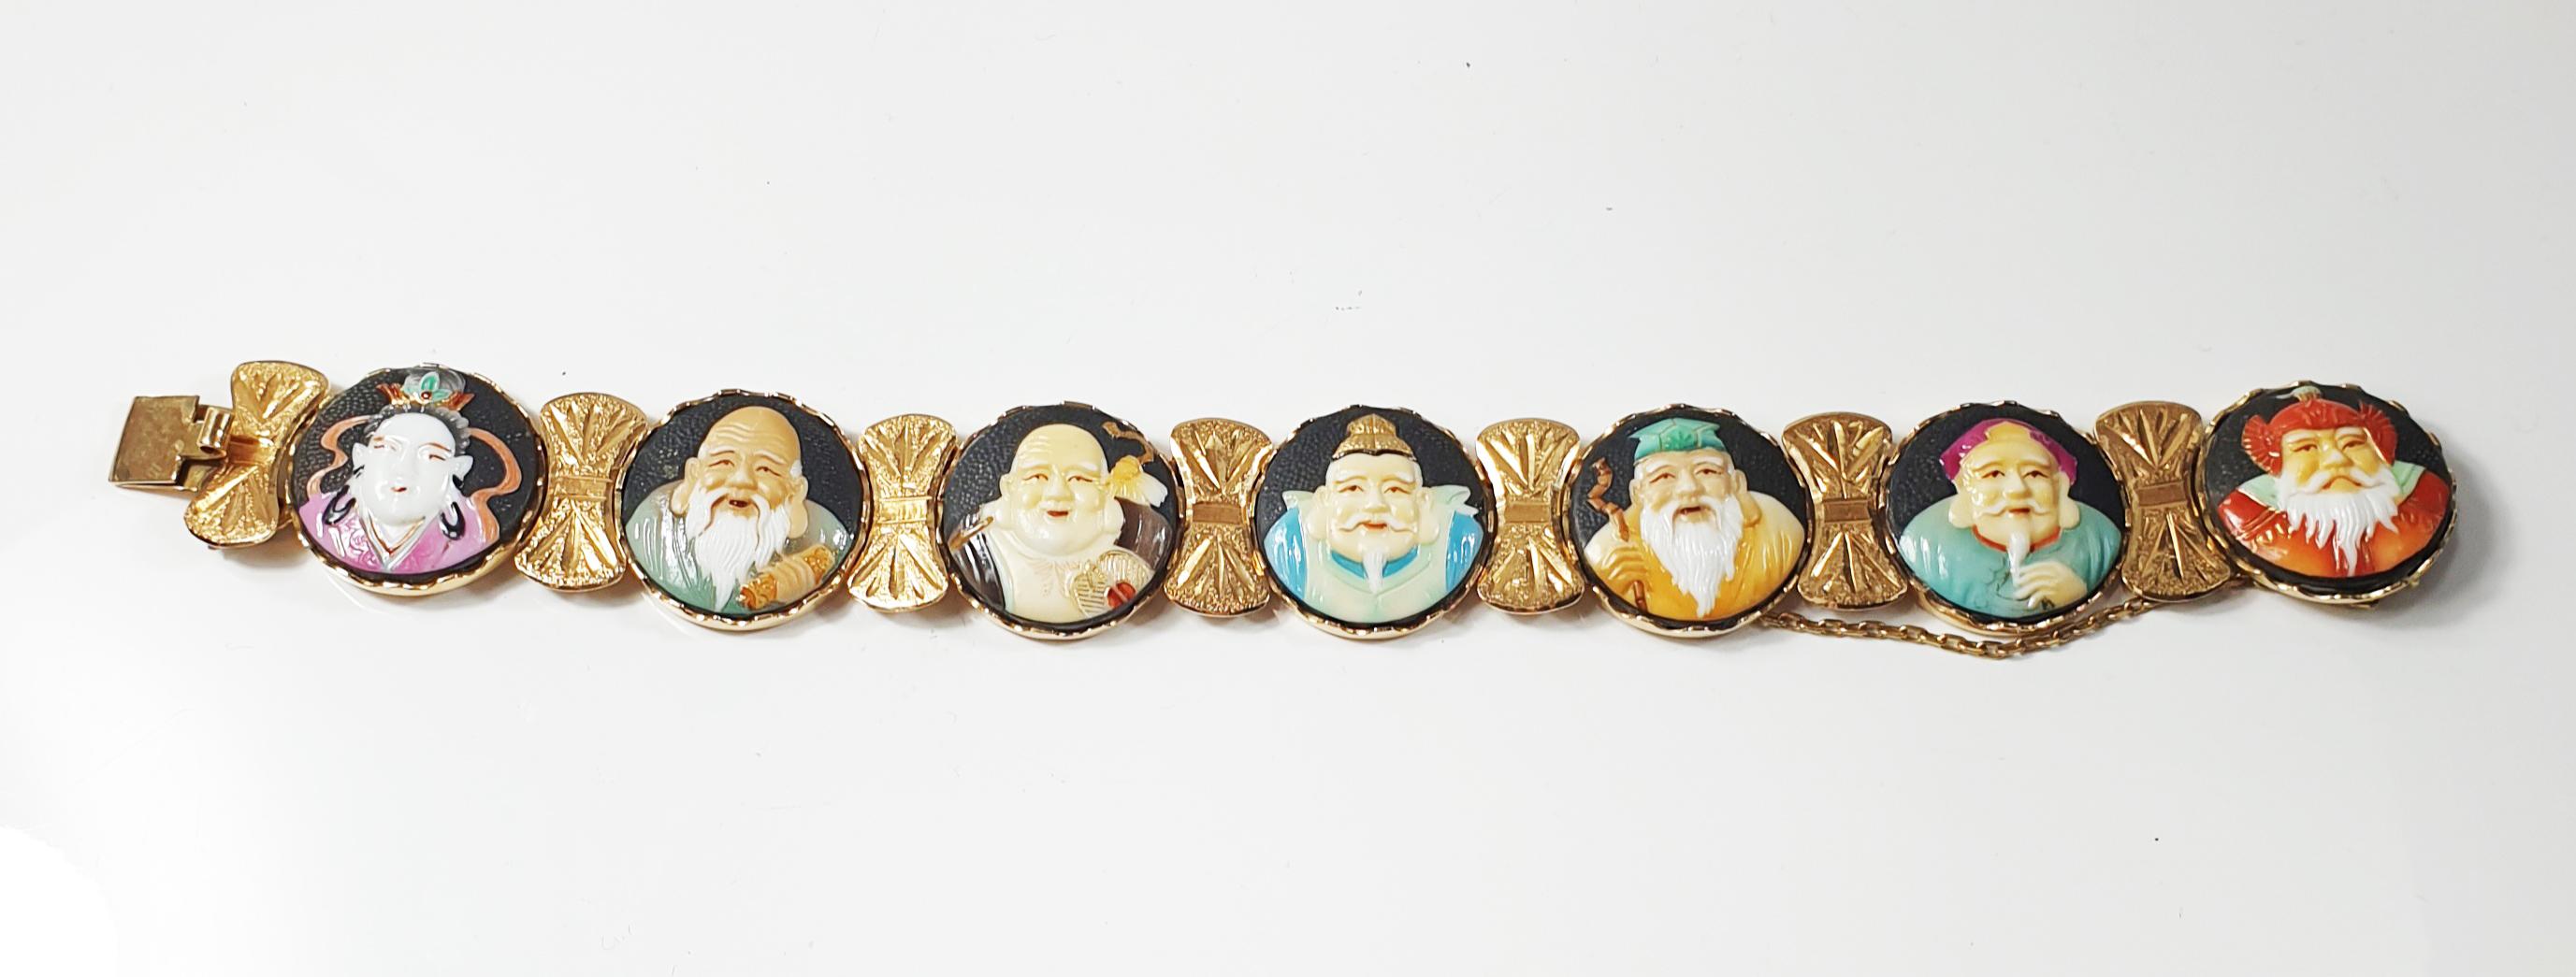 Antique Japanese  Toshikane 7 lucky Gods 18k gold, porcelain bracelet  circa 1940's 
Seven Lucky Gods bracelet of porcelain faces set in 18k solid gold
The detail on each Japanese deity is just incredible
The seven gods of fortune, or seven